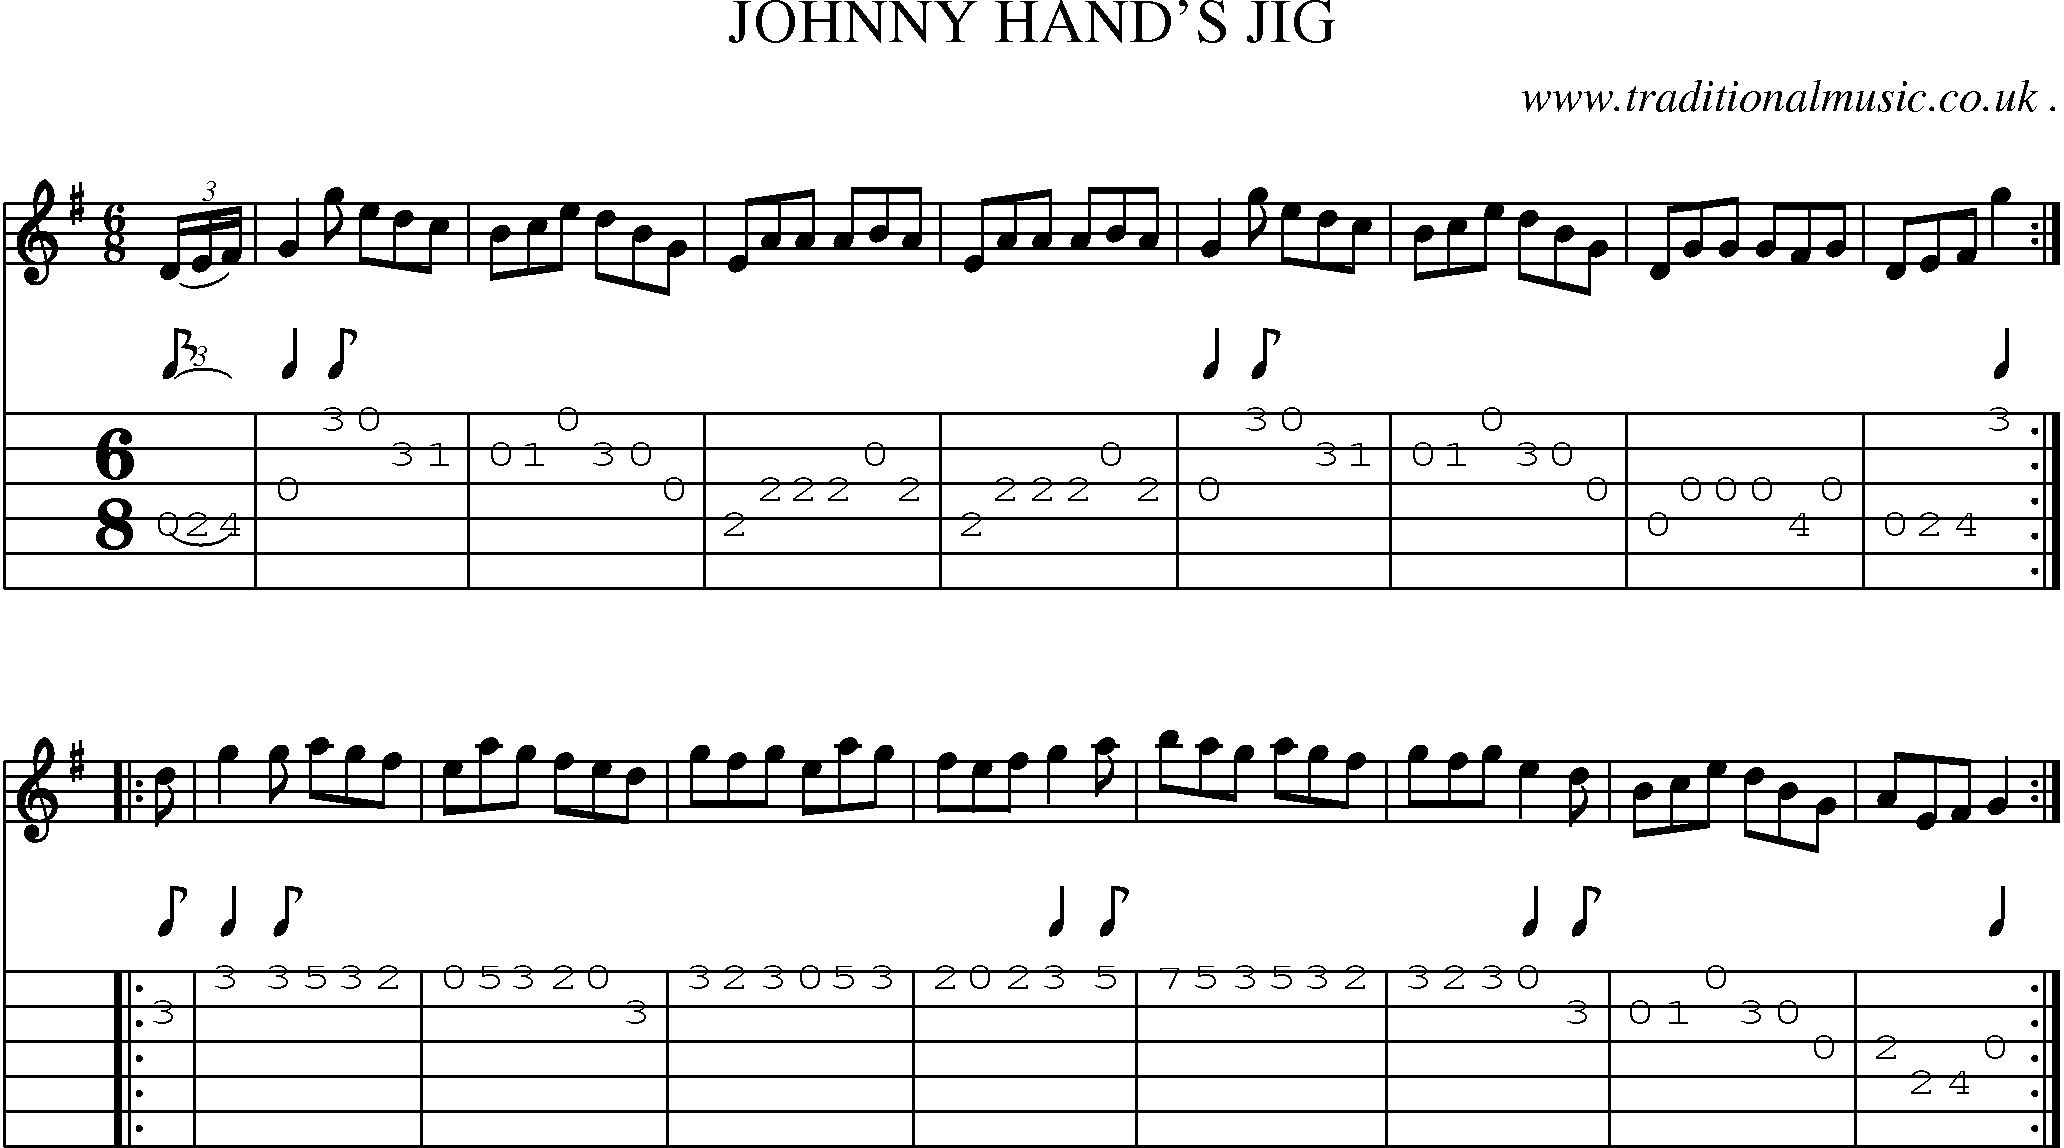 Sheet-Music and Guitar Tabs for Johnny Hands Jig